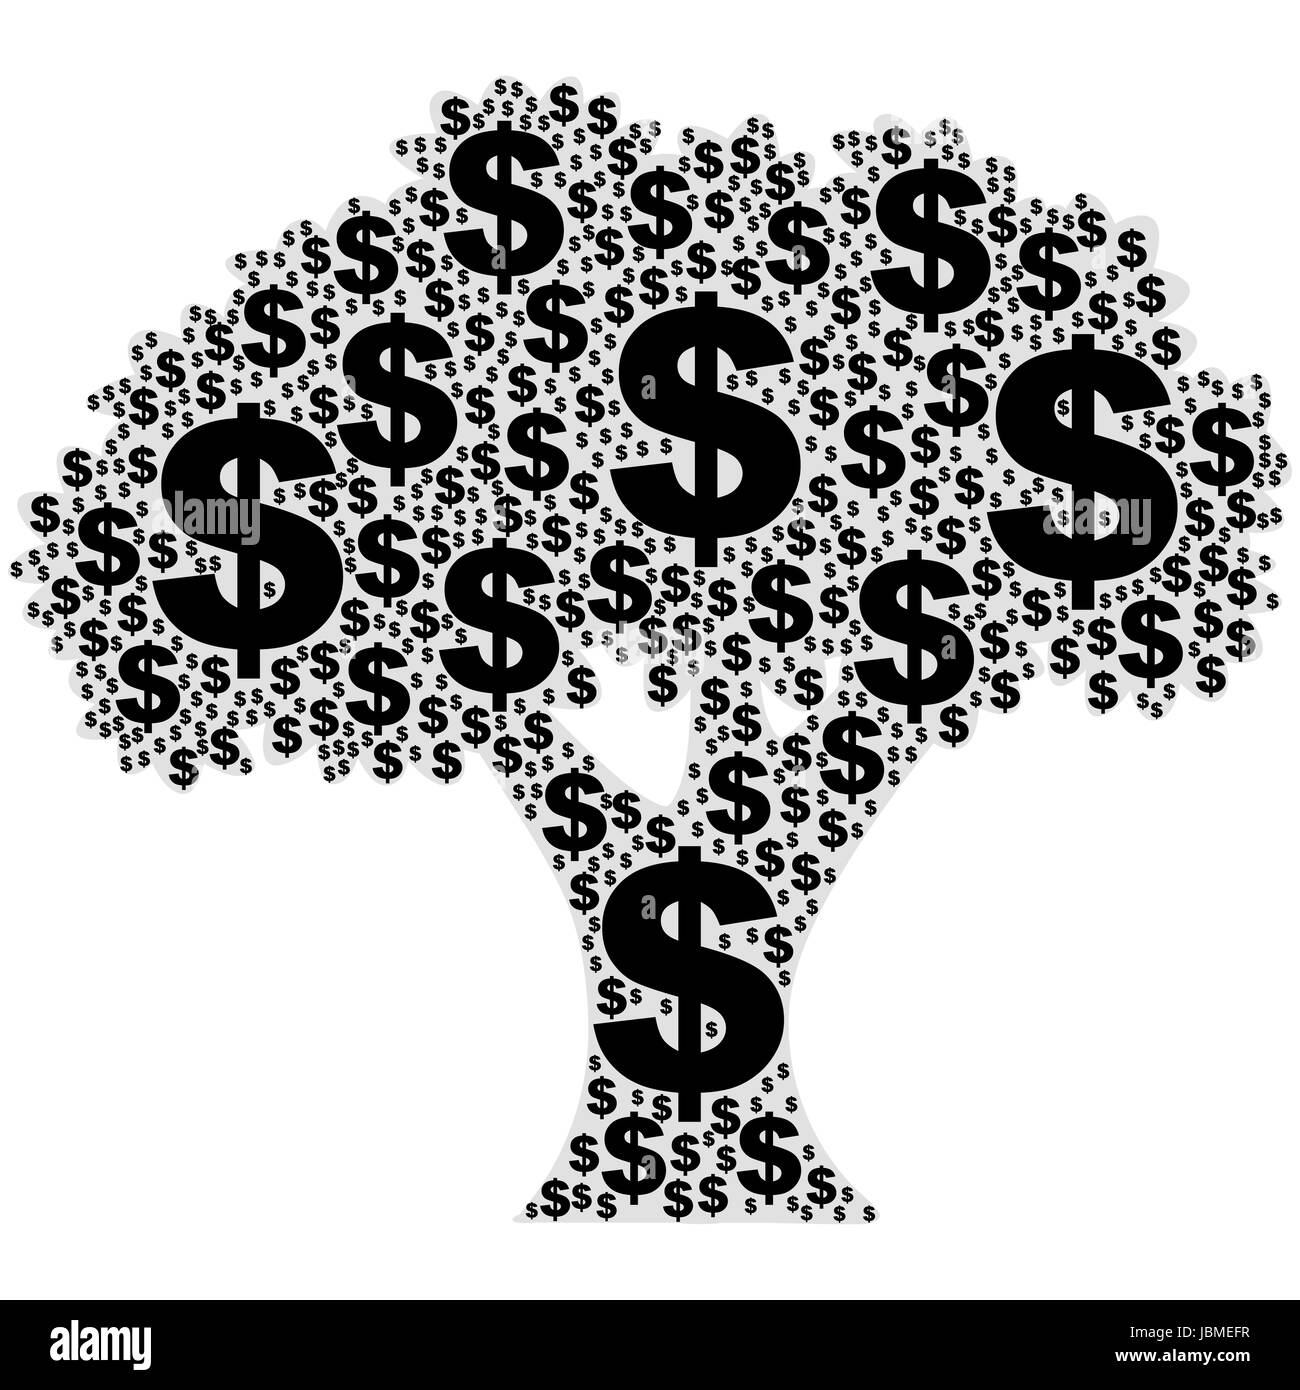 Dollar Signs Clip Art Black And White